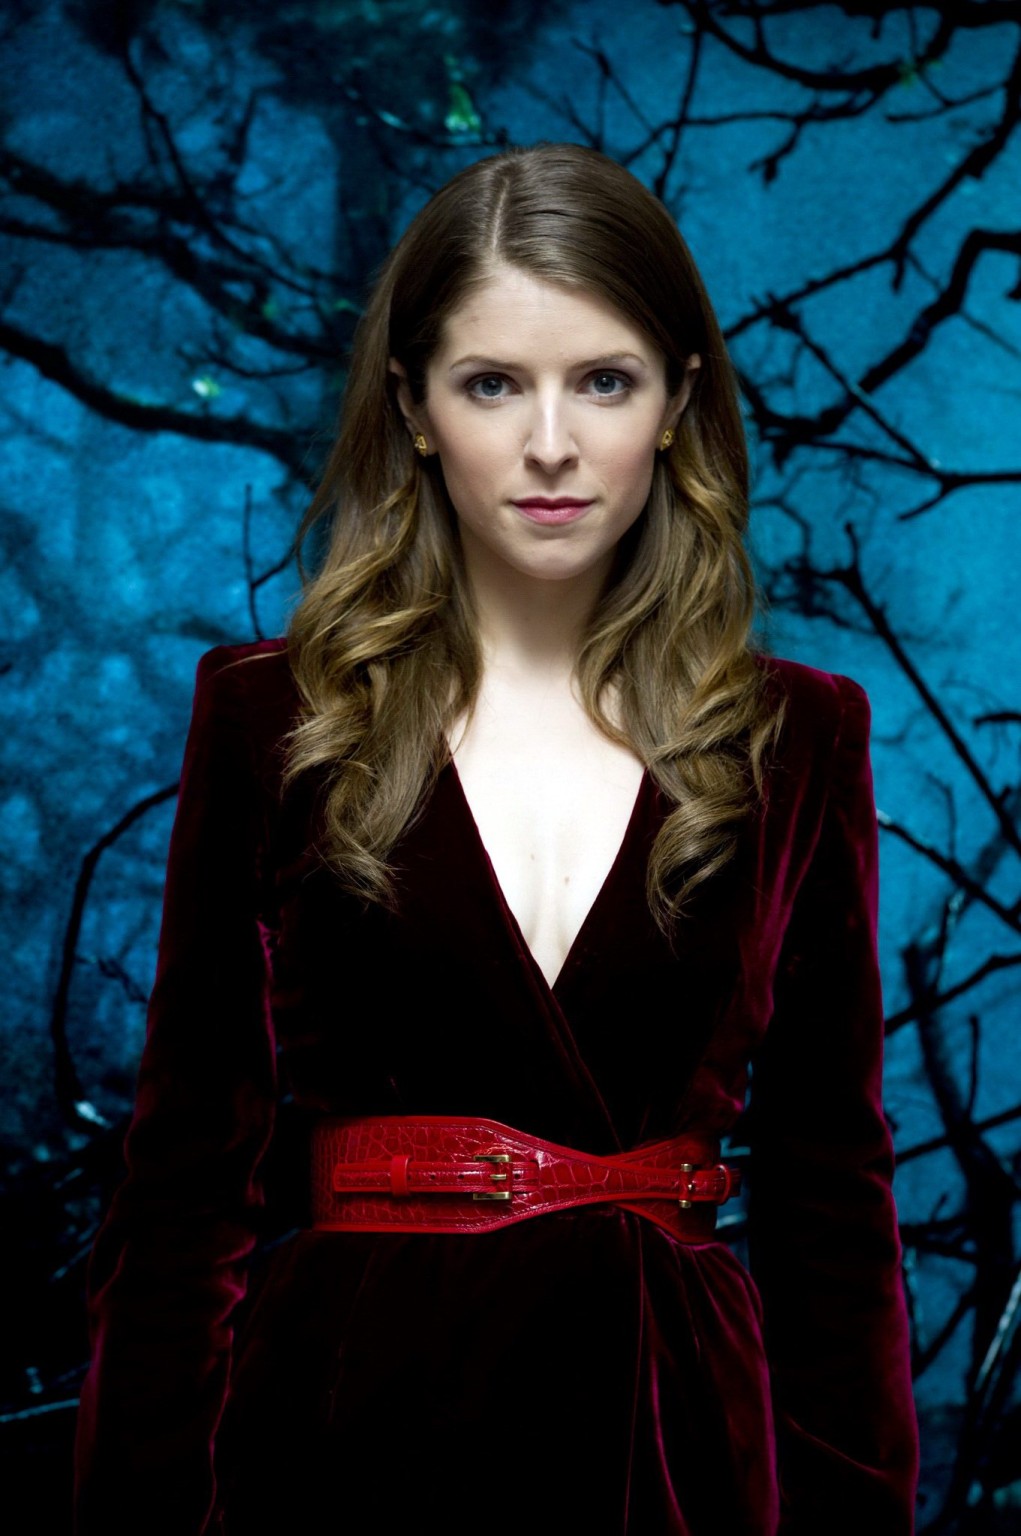 Anna kendrick cleavy für into the woods photocall im corinthia hotel in london
 #75177079